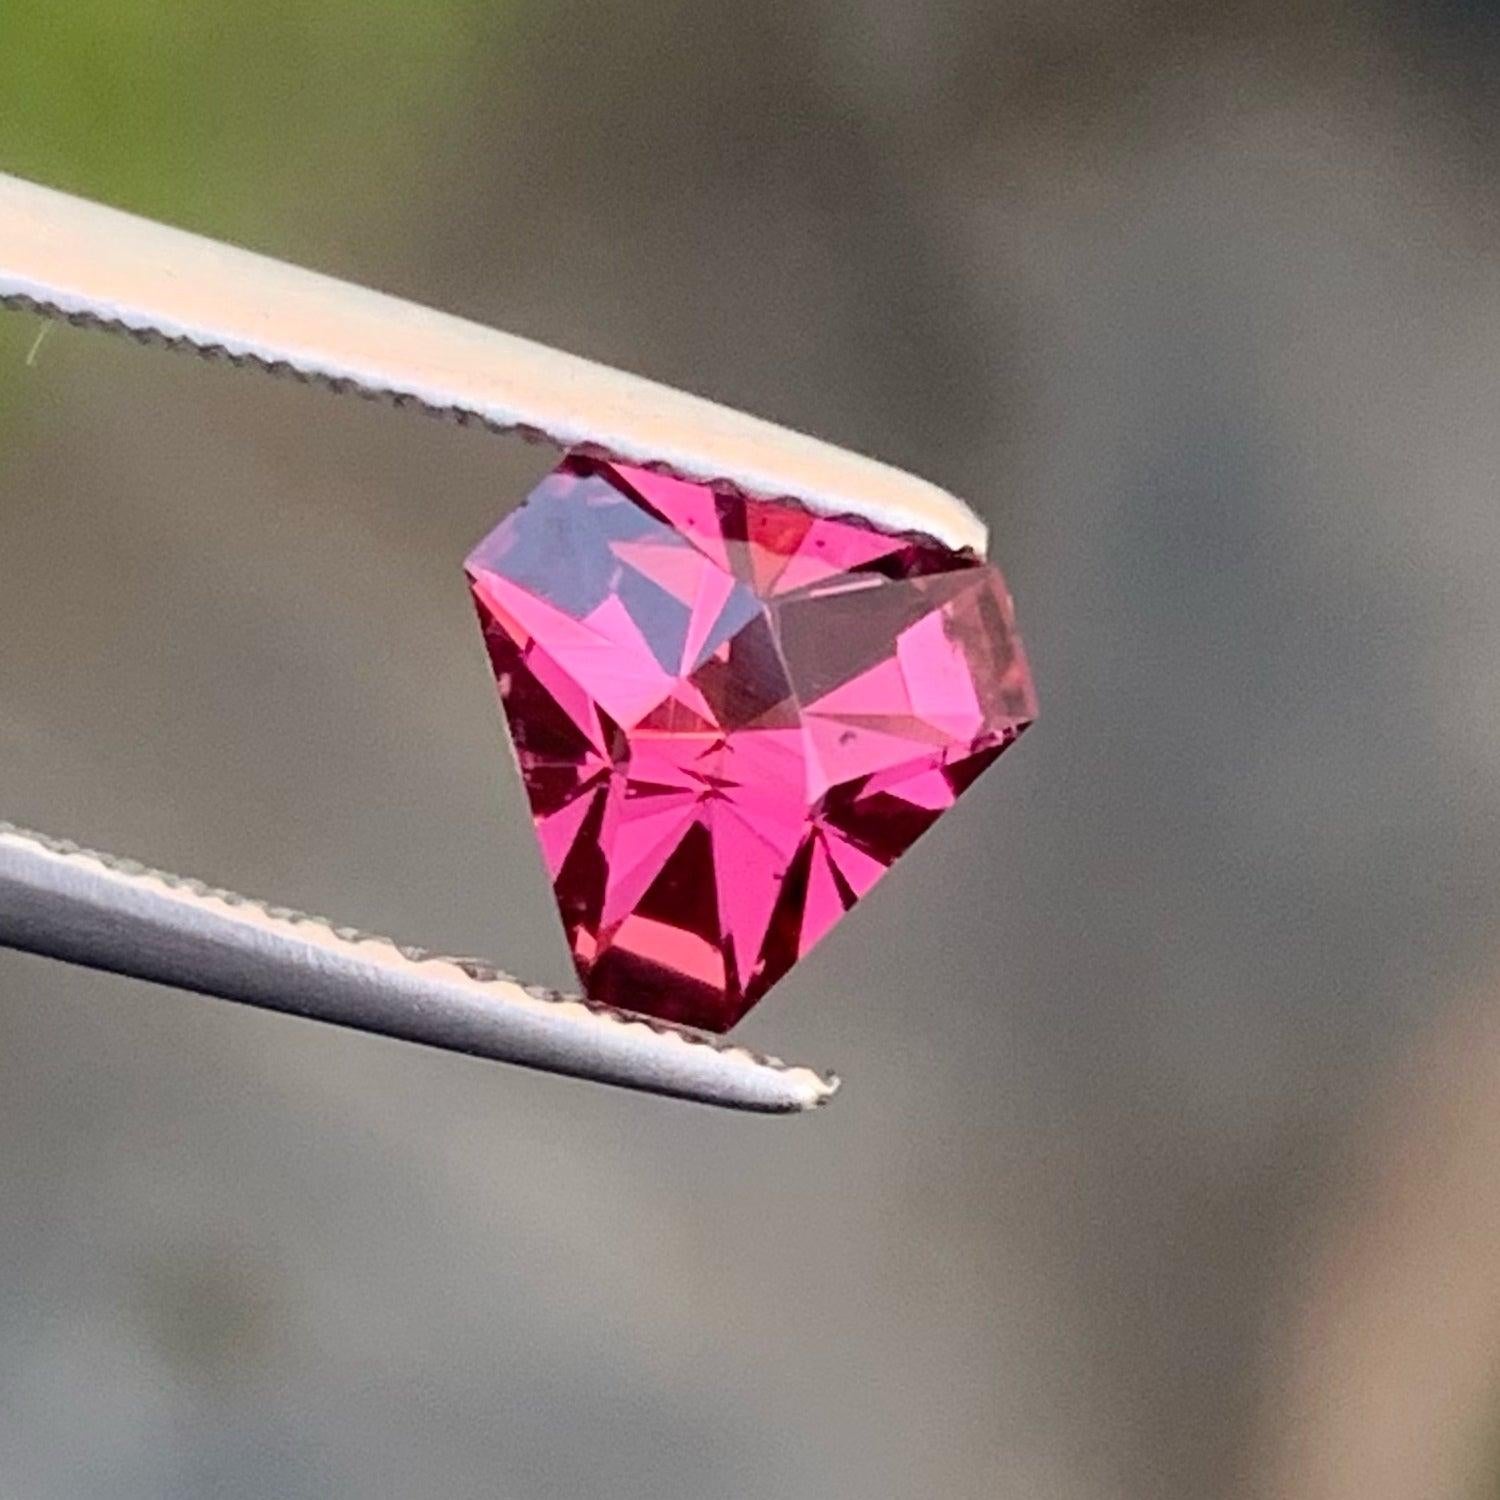 Natural Purplish Red Garnet Gemstone, Available For Sale at Wholesale Price Natural High Quality 1.50 Carats Unheated  Garnet Gemstone From Malawi.

 

Product Information:
GEMSTONE NAME: Natural Purplish Red Garnet Gemstone
WEIGHT: 1.50